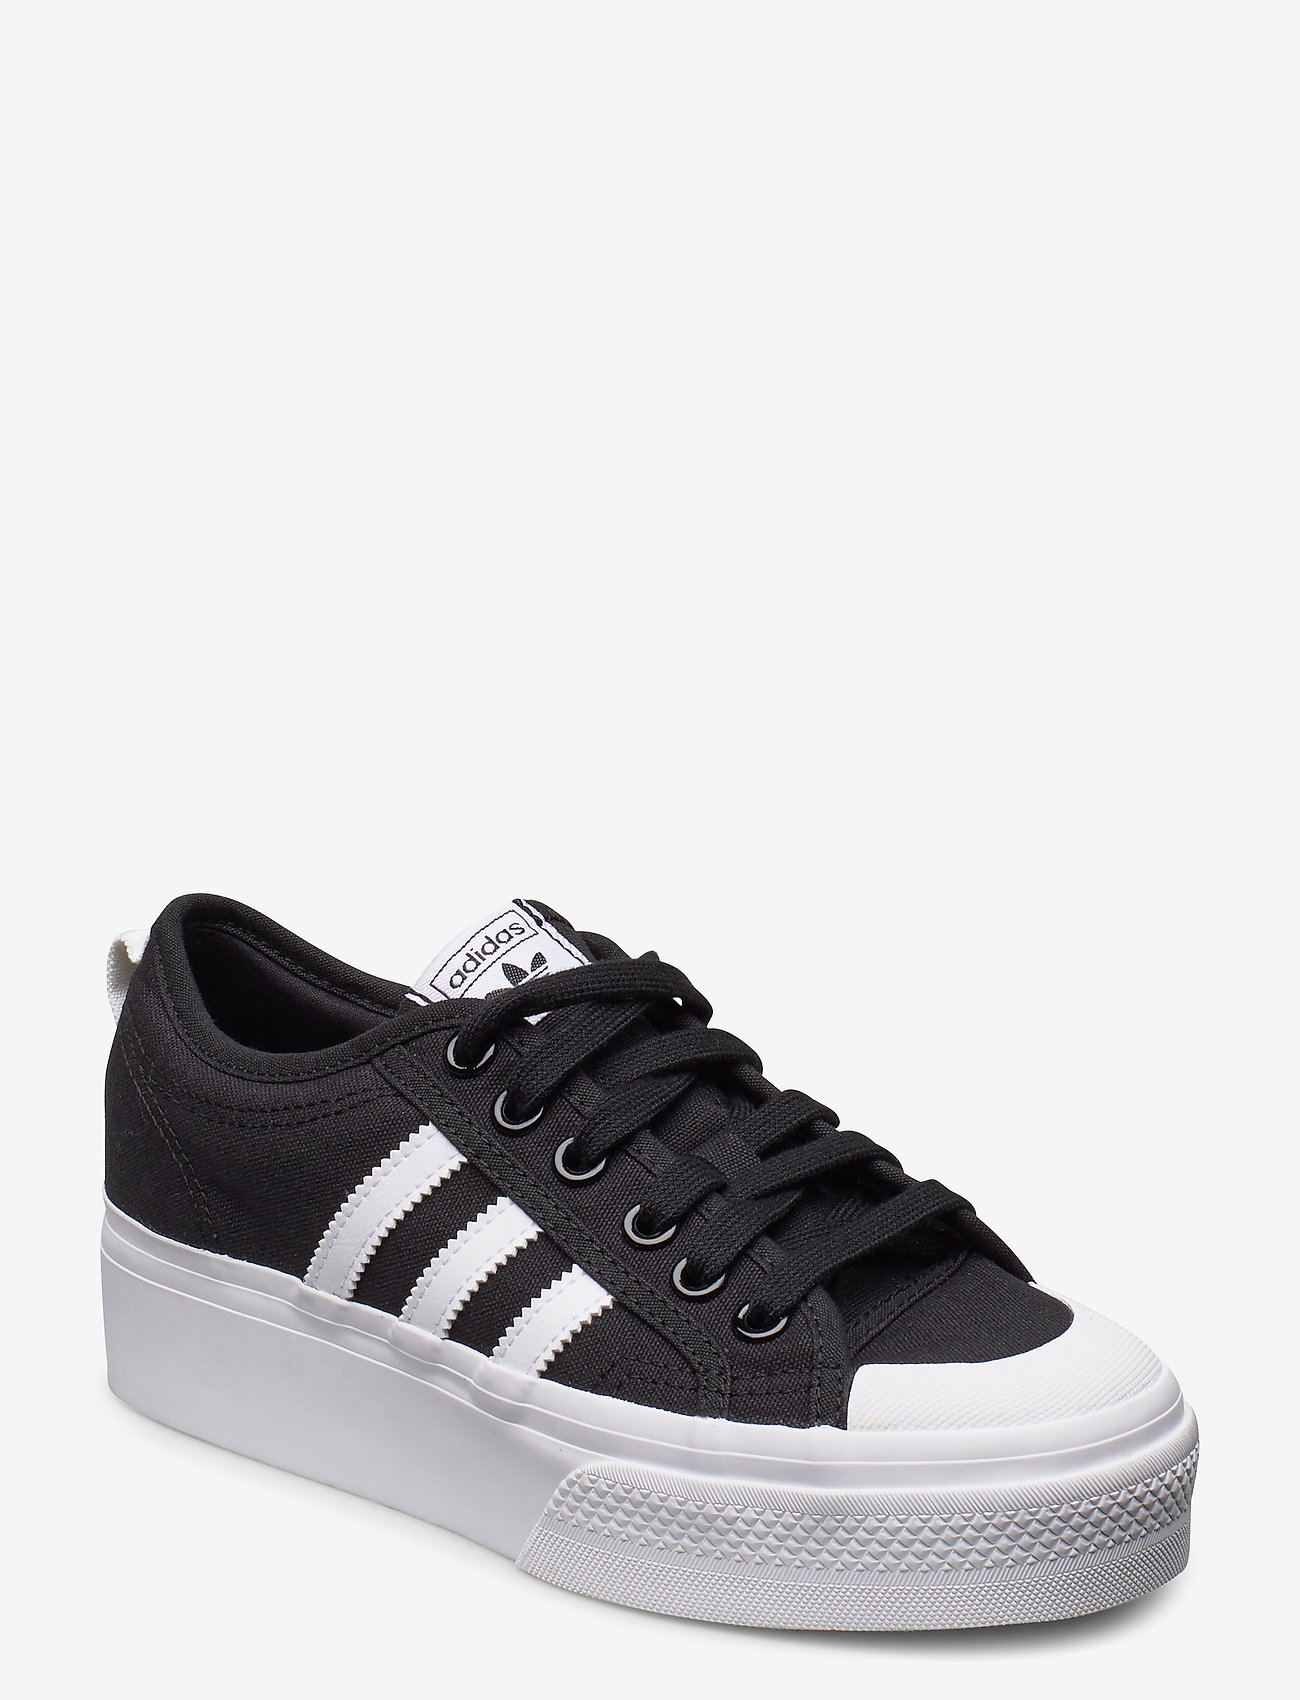 View Adidas Originals Nizza Platform Sneakers In Black And White Background